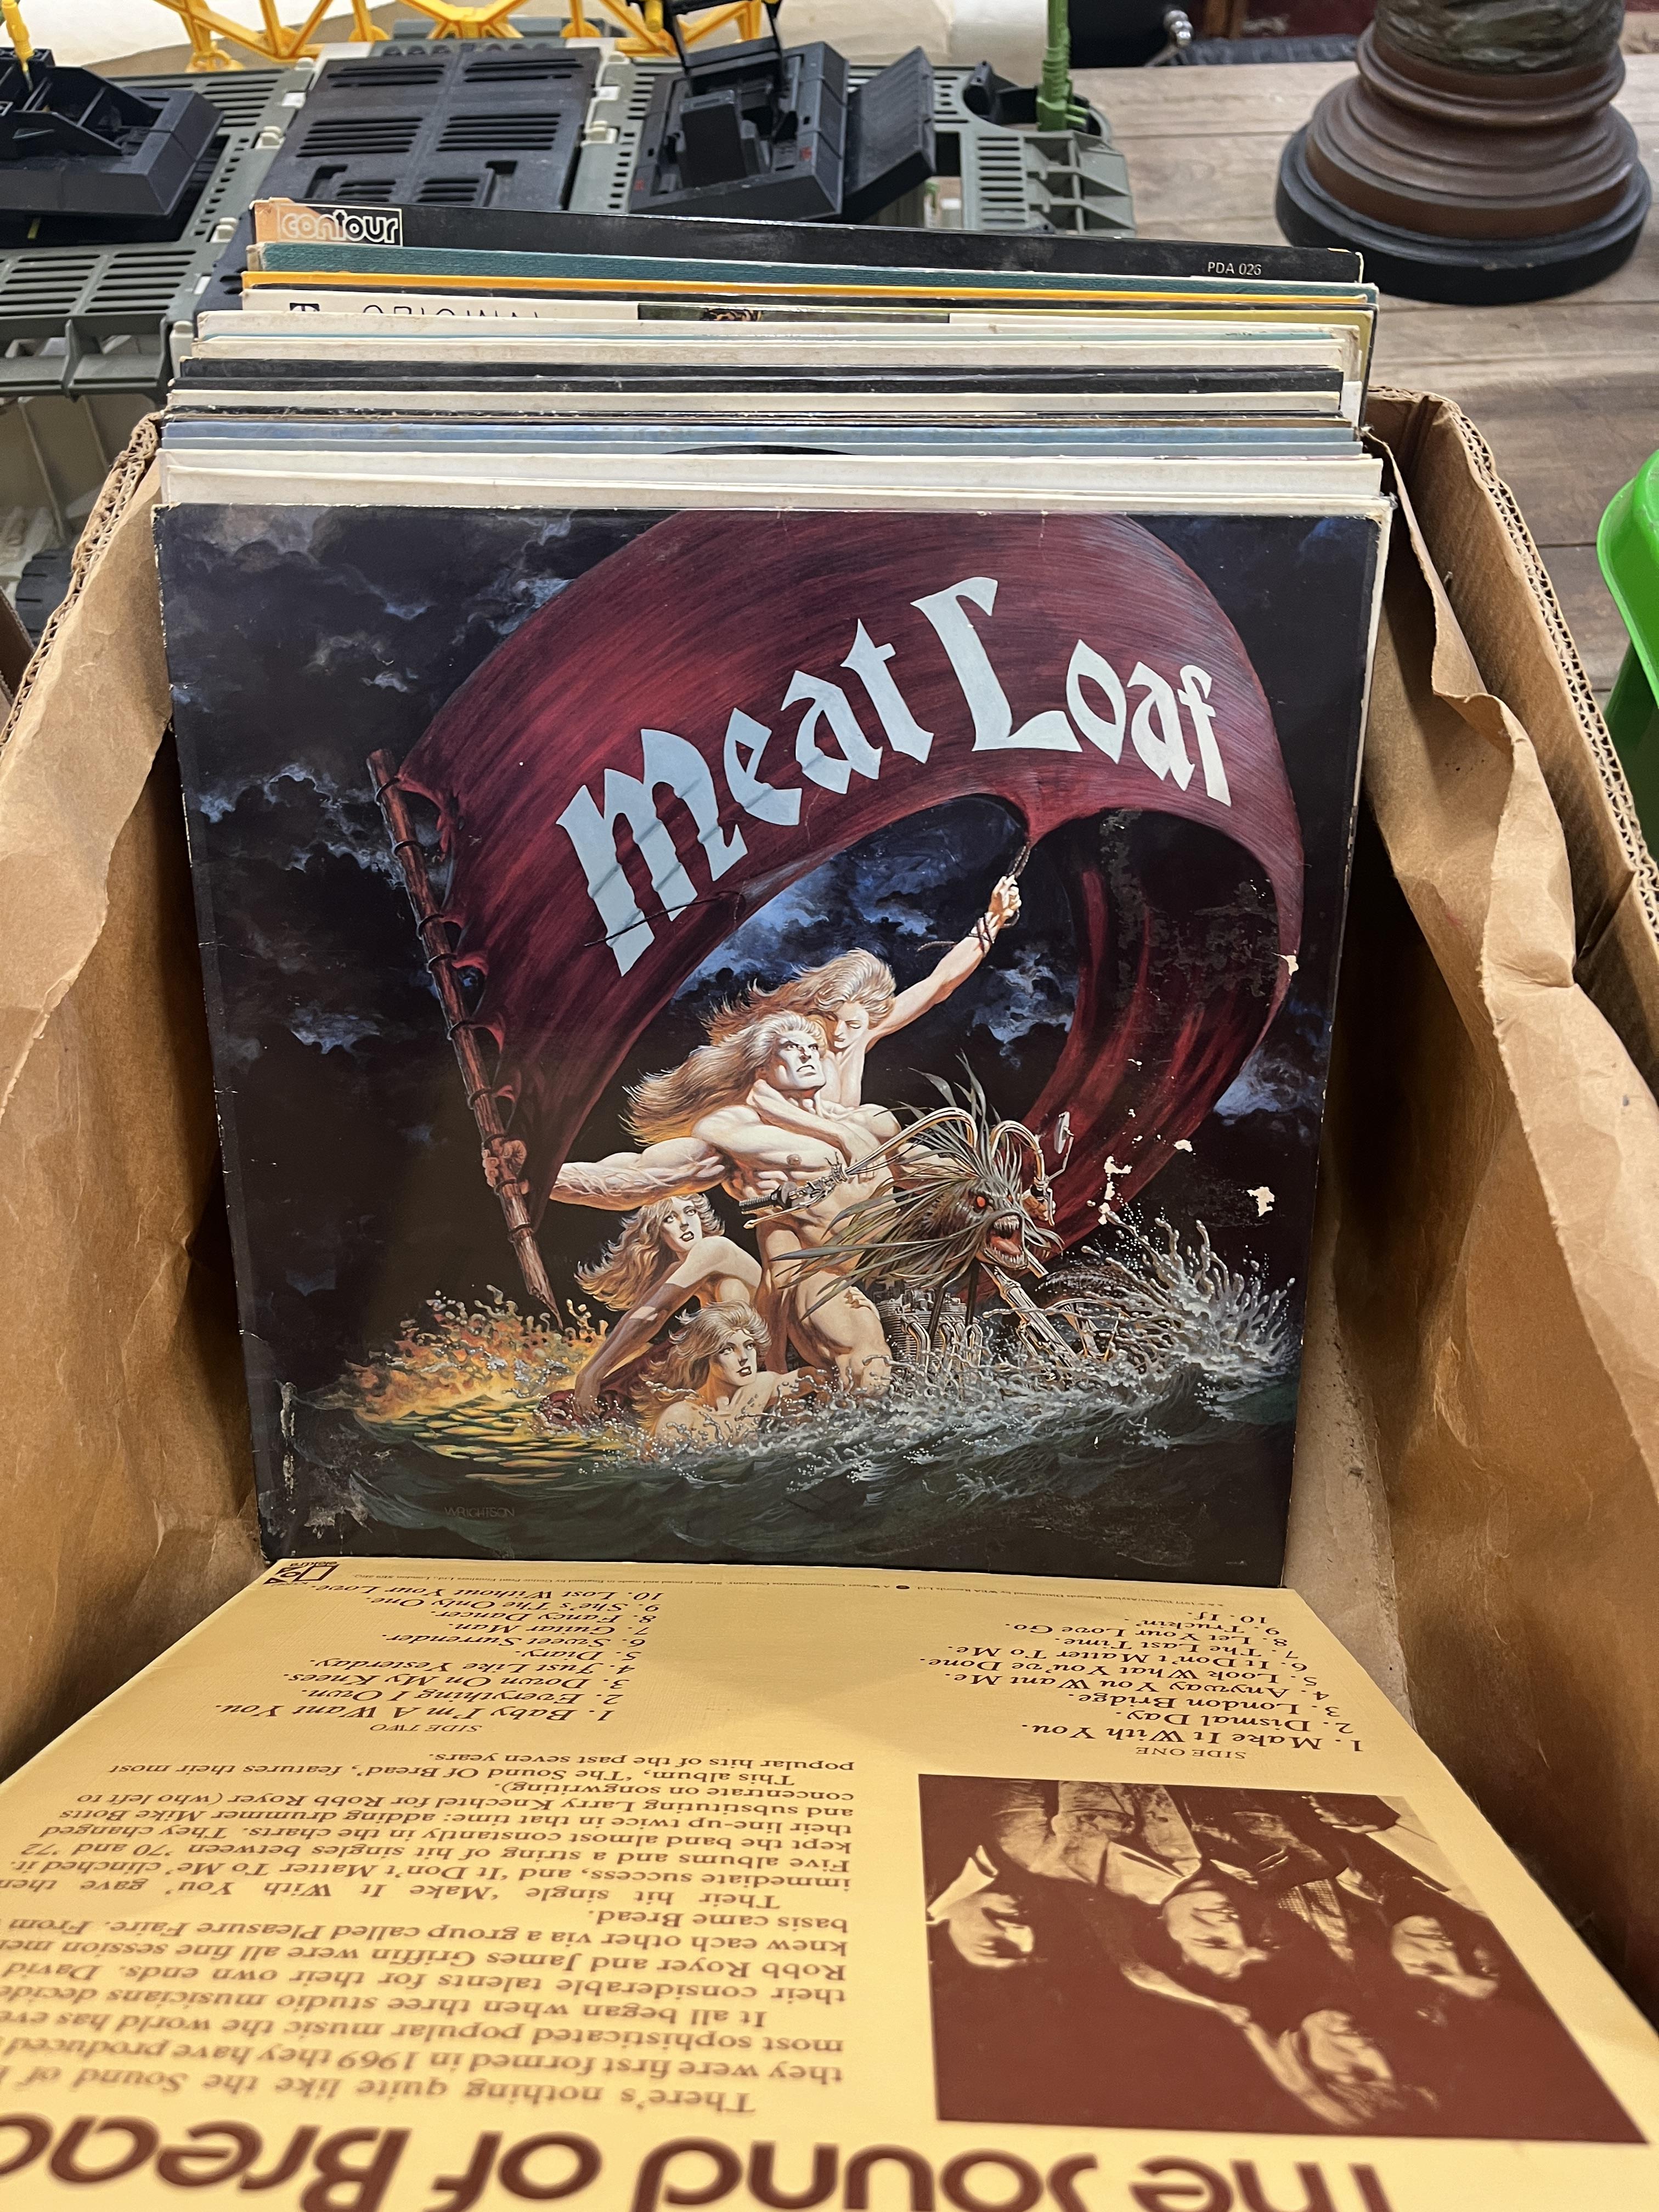 Collection of LPs to include Jimi Hendrix, Diana Ross etc - Image 12 of 36